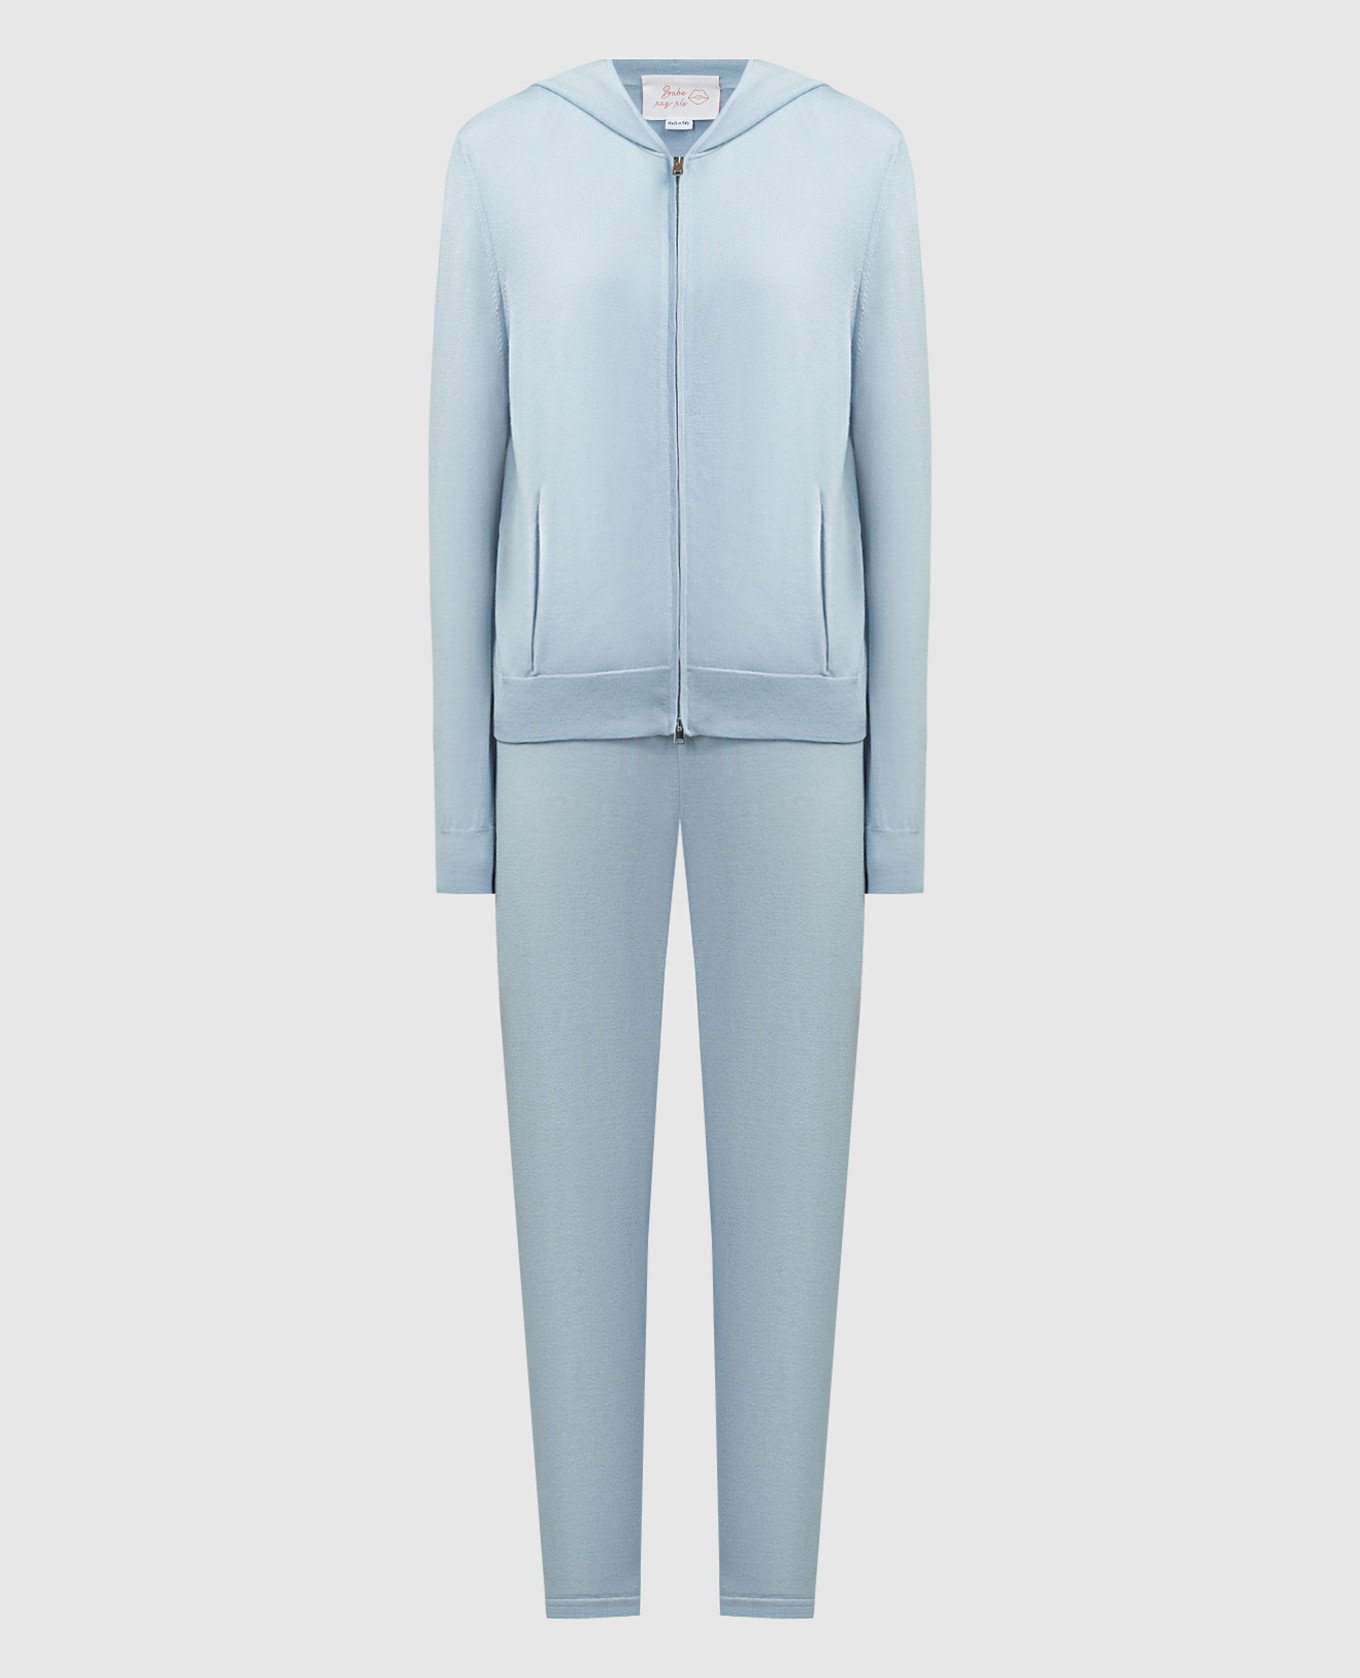 Blue sports suit made of wool